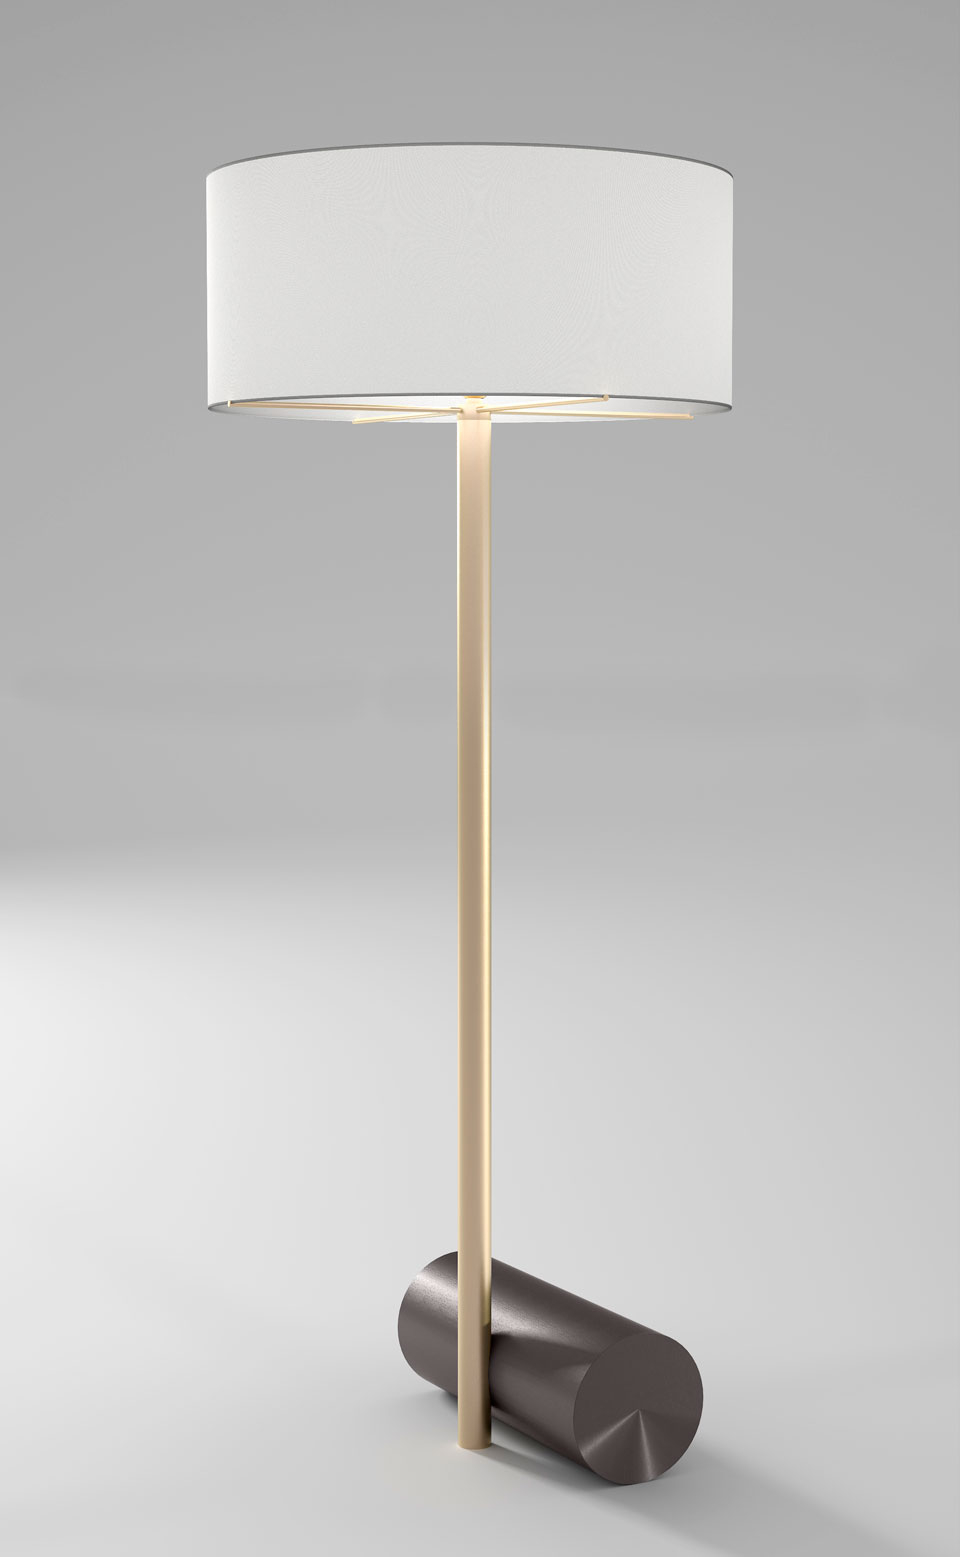 Cale Floor Lamp Graphite Base Satin Brass Foot And Cylindrical Shade In White Percaline Dimmer regarding sizing 960 X 1557